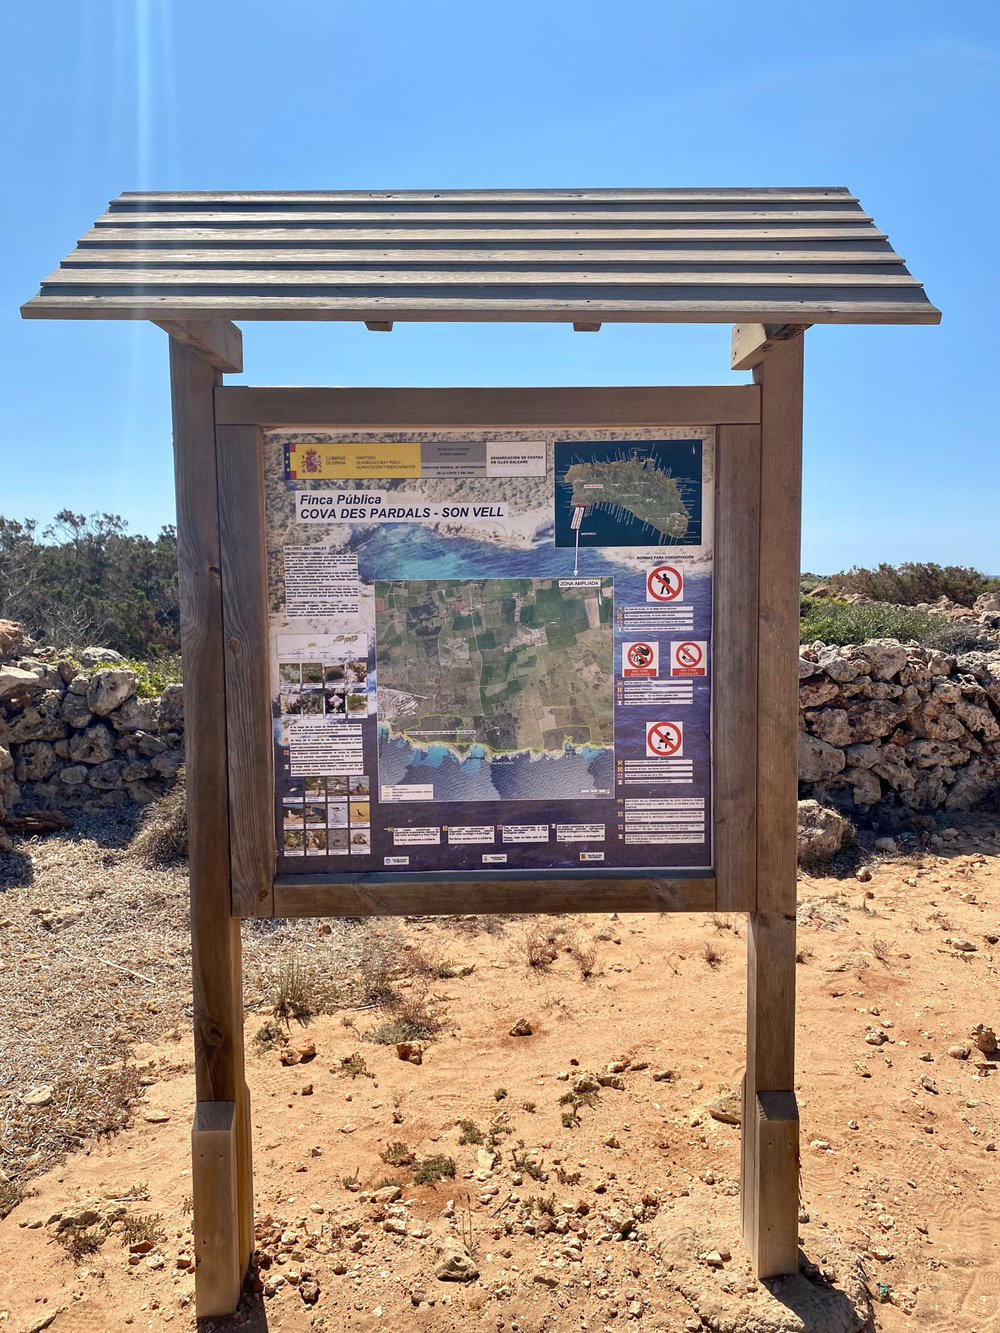 Wooden informational signboard at Cova des Pardals - Son Vell in a natural, rocky landscape. The sign includes a map, text details about the area, regulations, and symbols indicating prohibited activities. The sky is clear and blue.